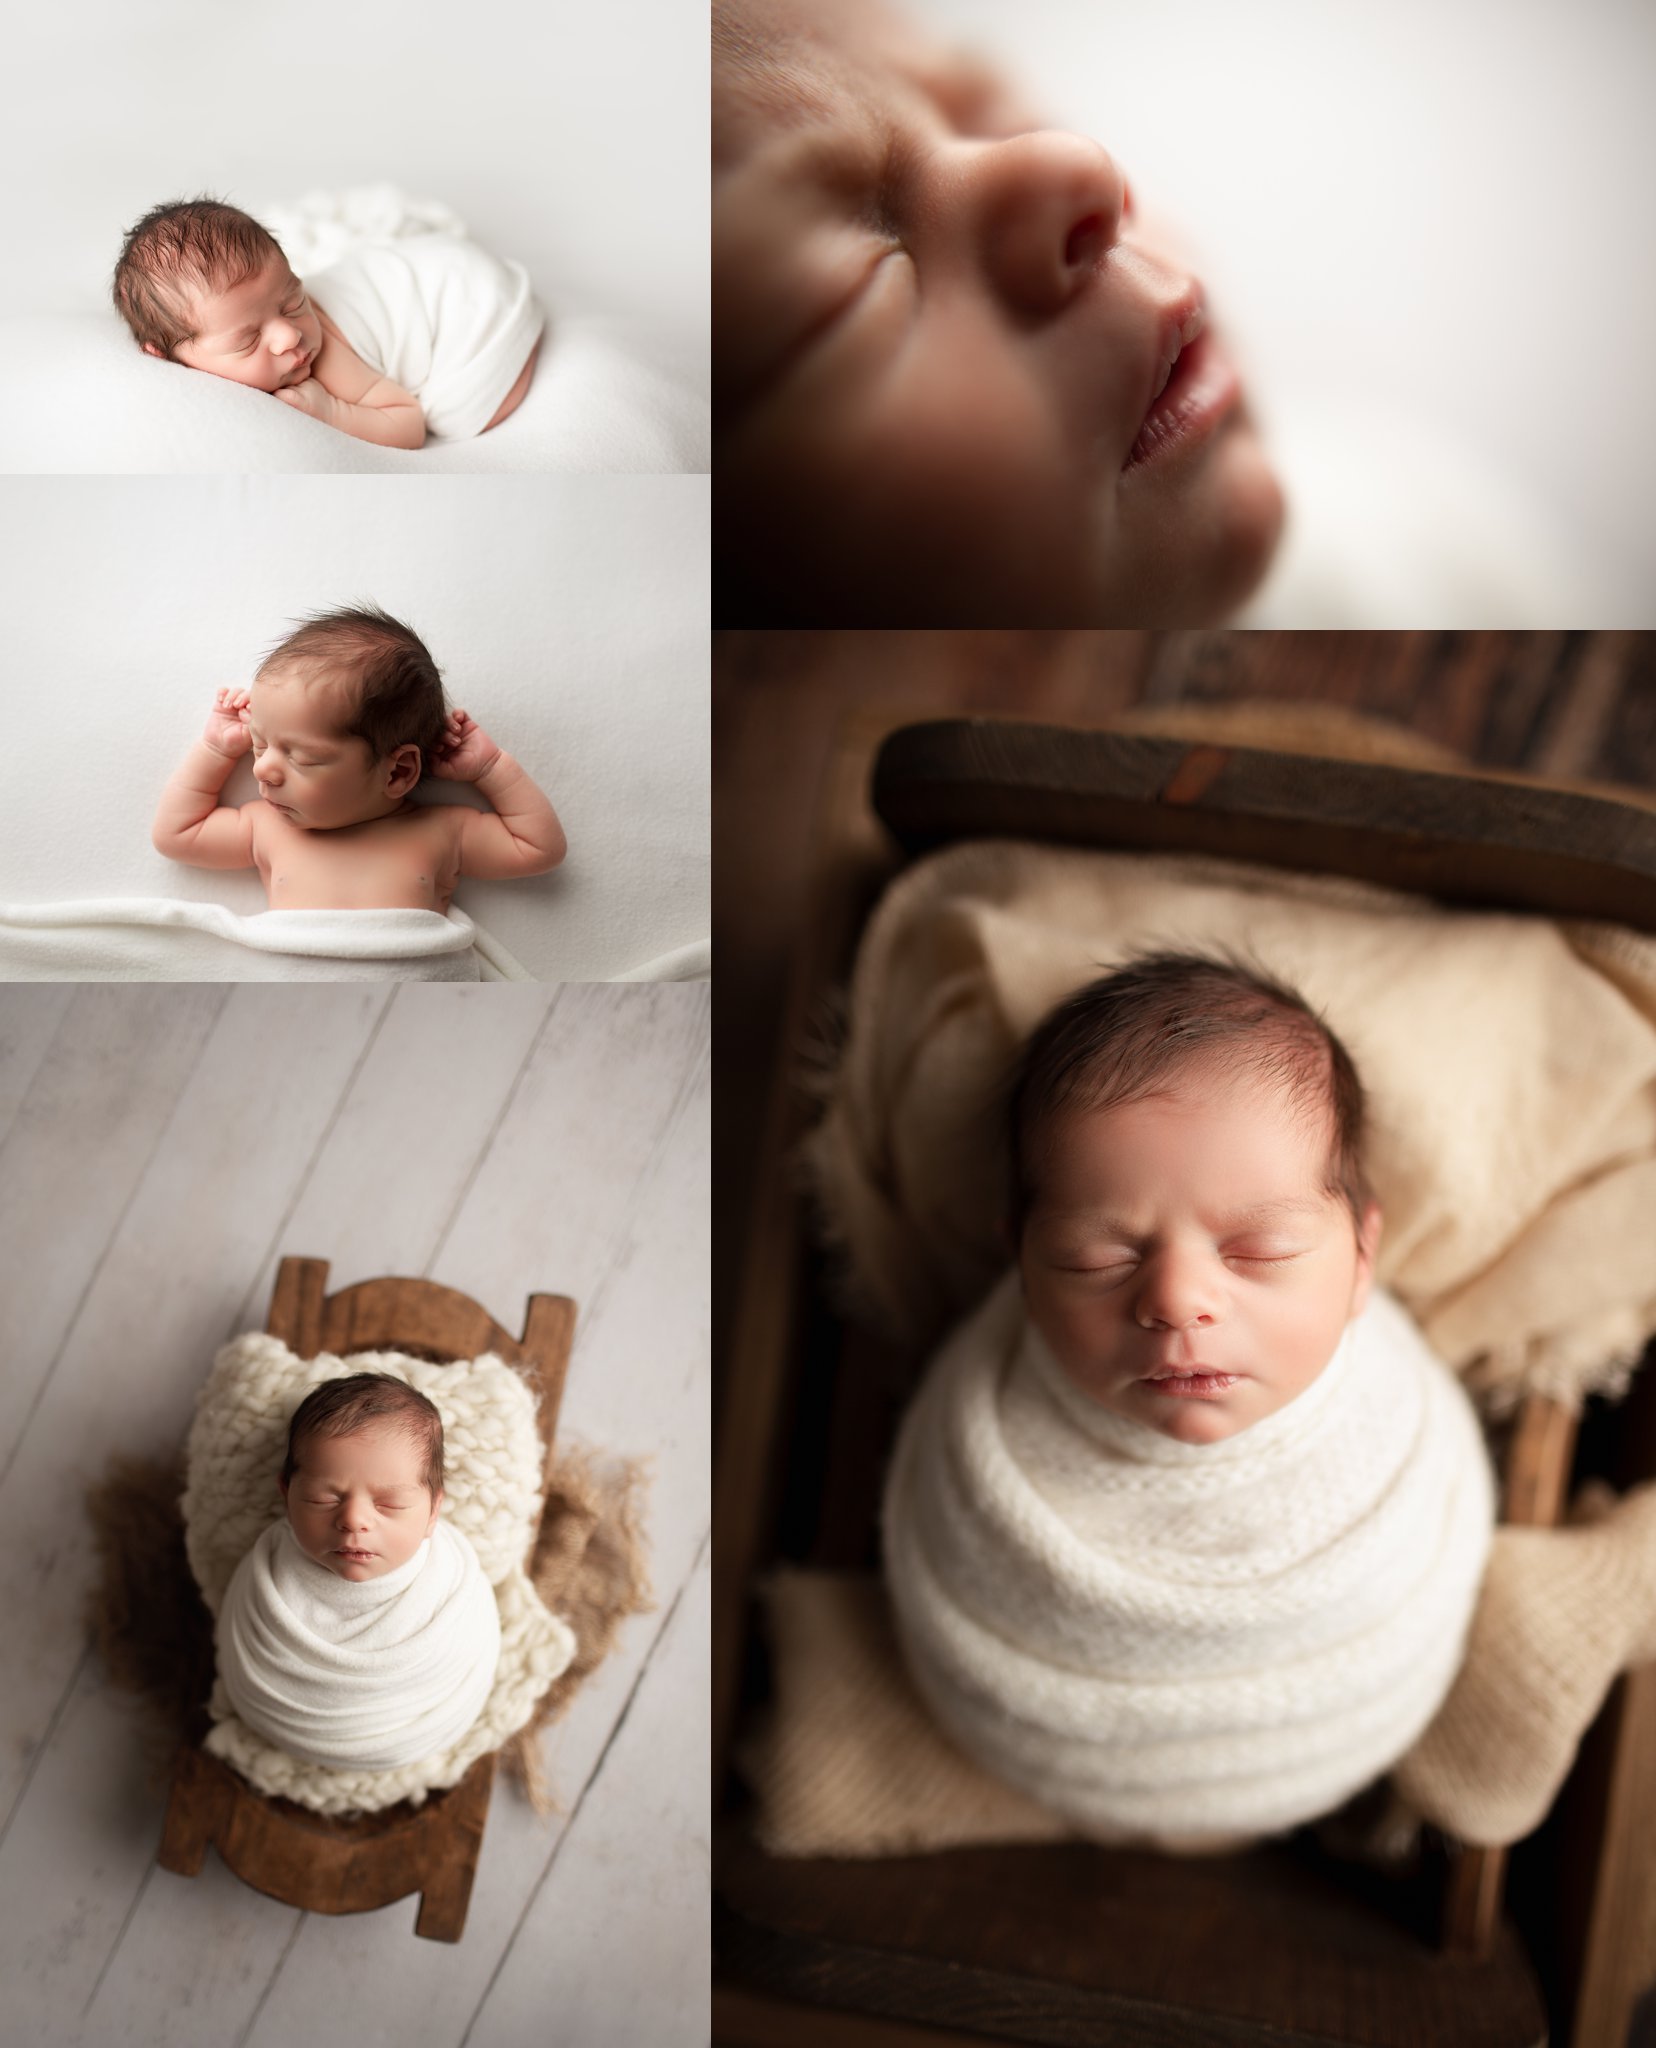 Smiles | Newborn photography poses, Newborn pictures, Baby photography